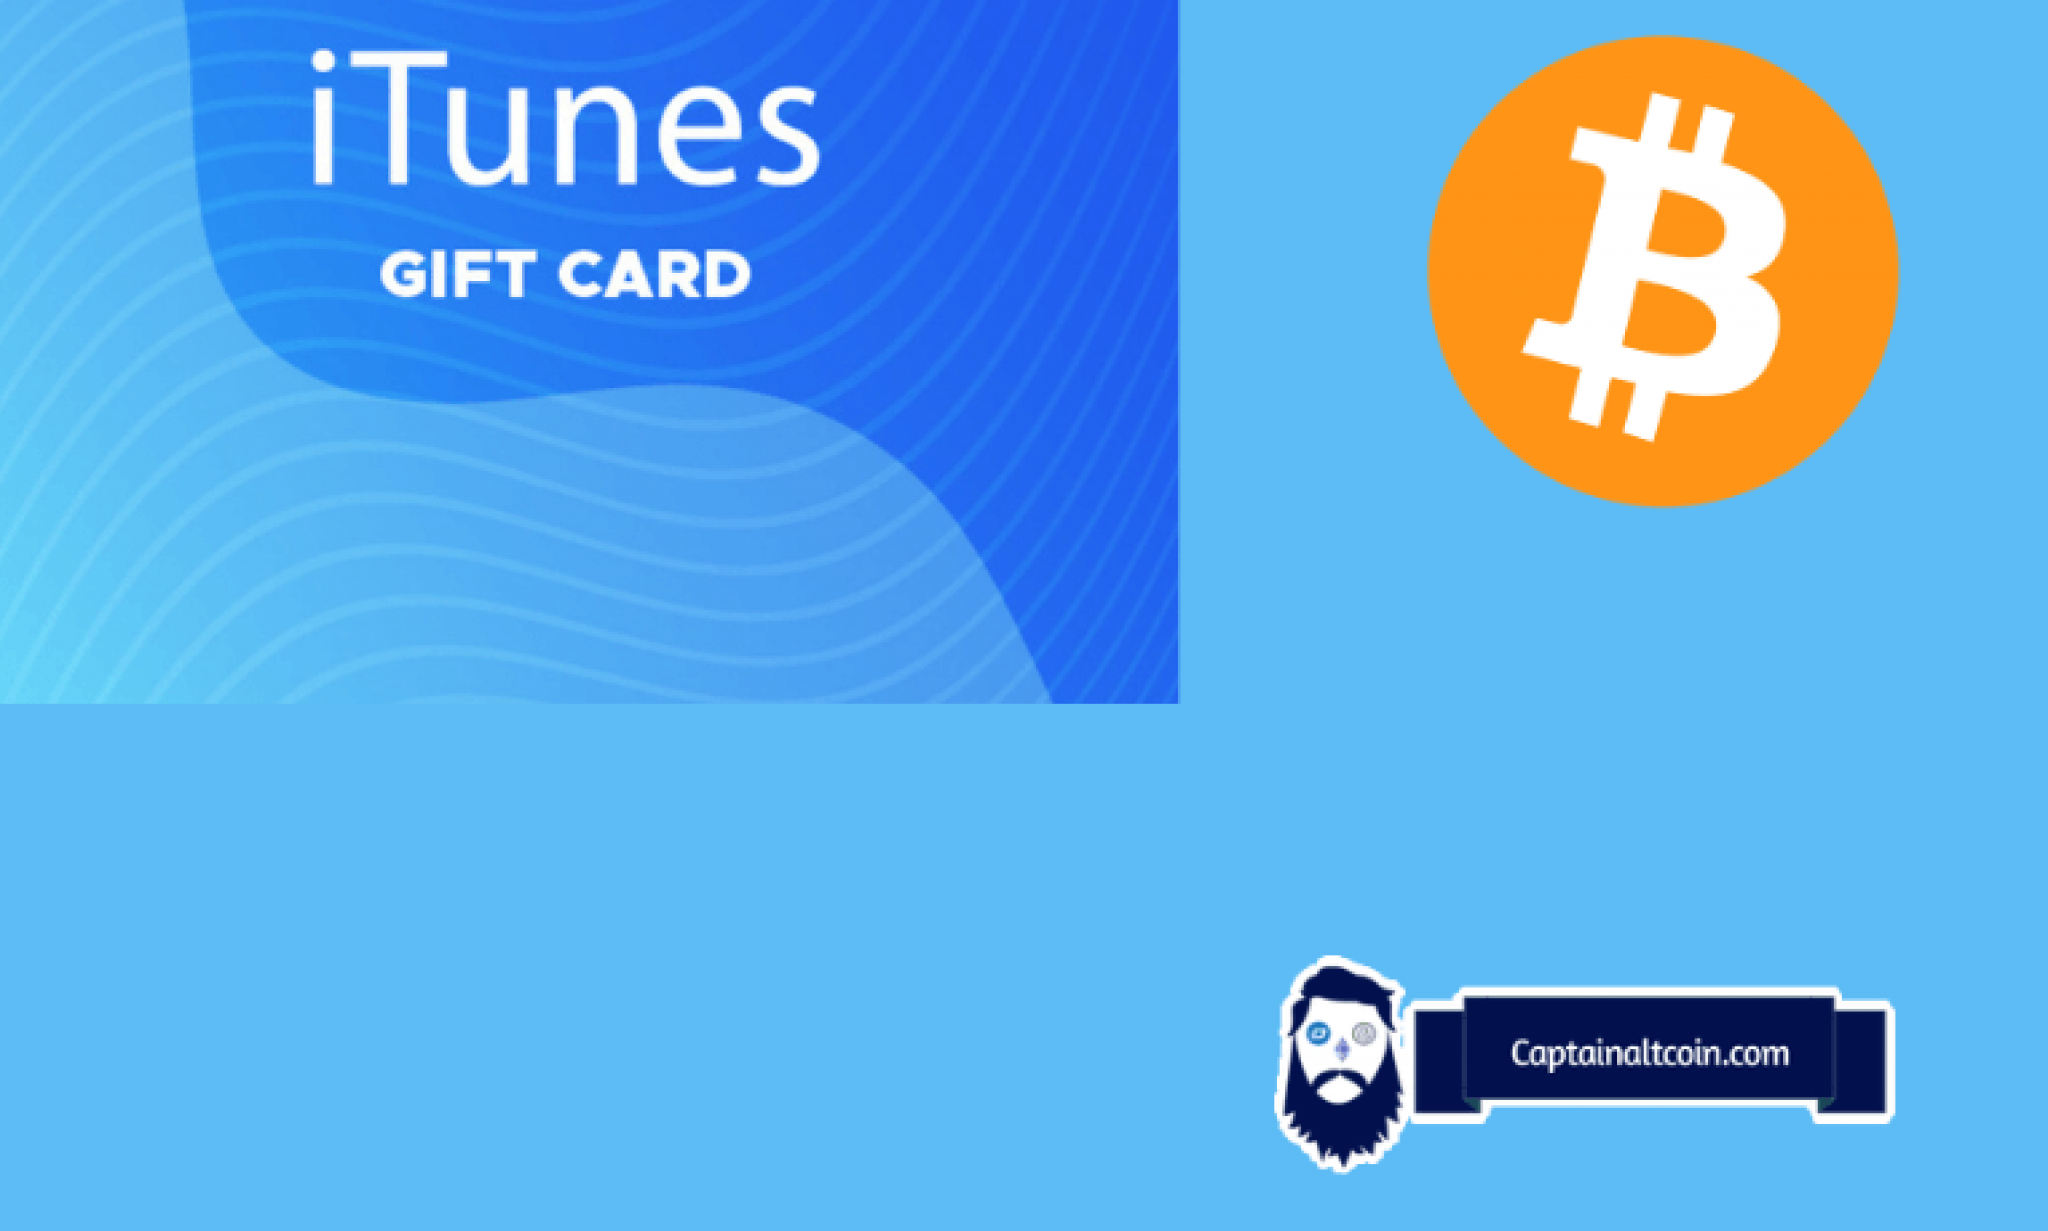 buy online itunes gift card with bitcoin